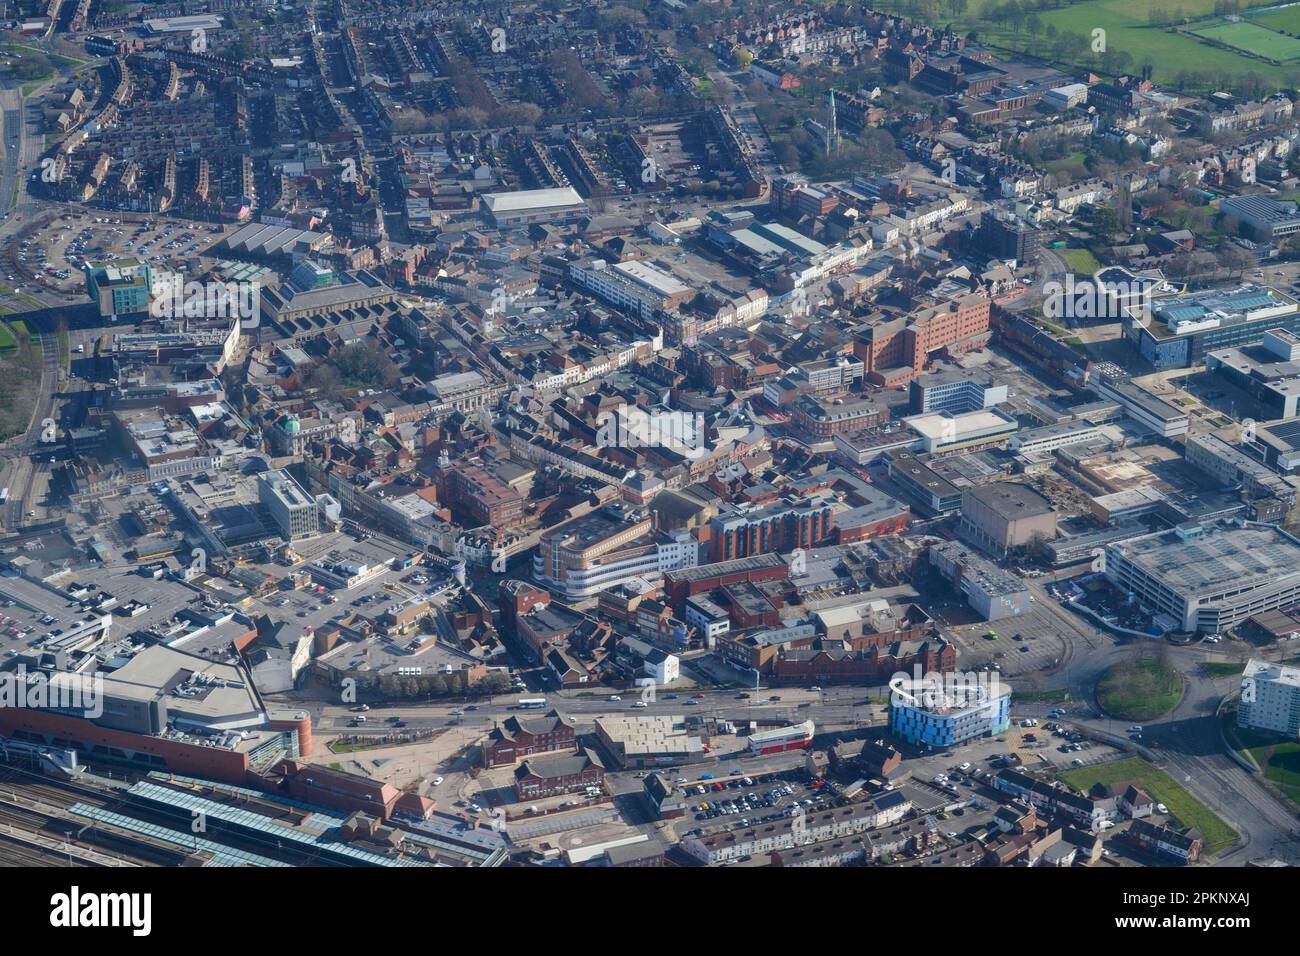 An aerial view of the new City of Doncaster, South Yorkshire, Northern England, UK Stock Photo